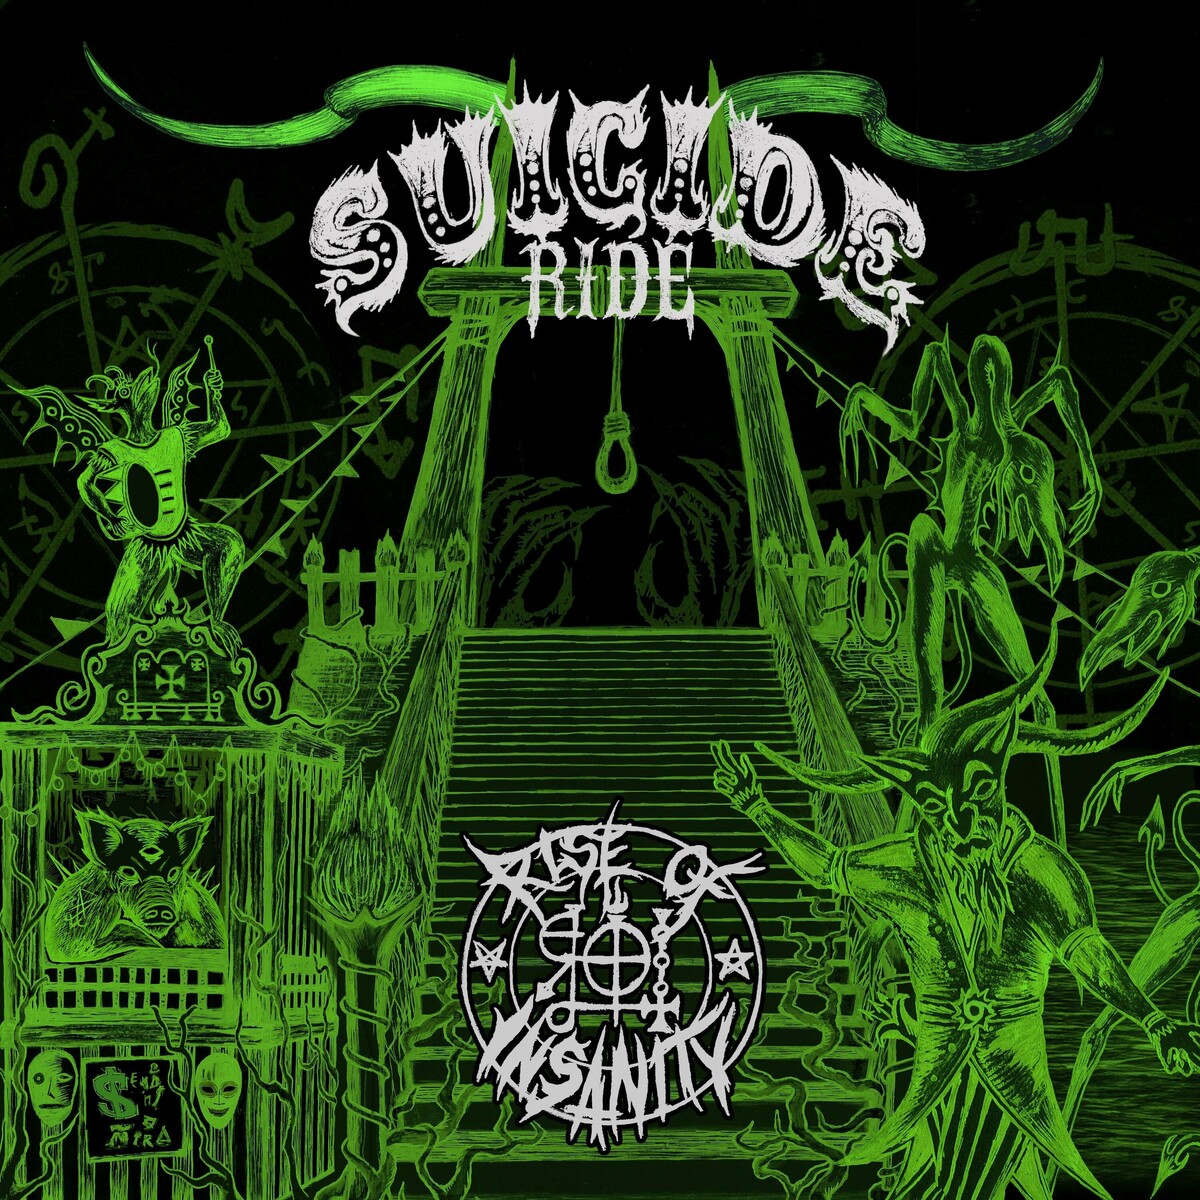 🎤 Rise Of Insanity
💿 Suicide Ride
⌛️ 30:18
🎸 Thrash Metal
🌍 Finlandia 🇫🇮
📅 26-04-24 🆕
➡️ open.spotify.com/intl-es/album/…

📄 metal-archives.com/bands/Rise_of_…
🌐 facebook.com/RiseofInsanity…
🌐 instagram.com/riseofinsanity…

#SepulMetal #SepulRecommended #HeardAndShared #TelakkaRecords